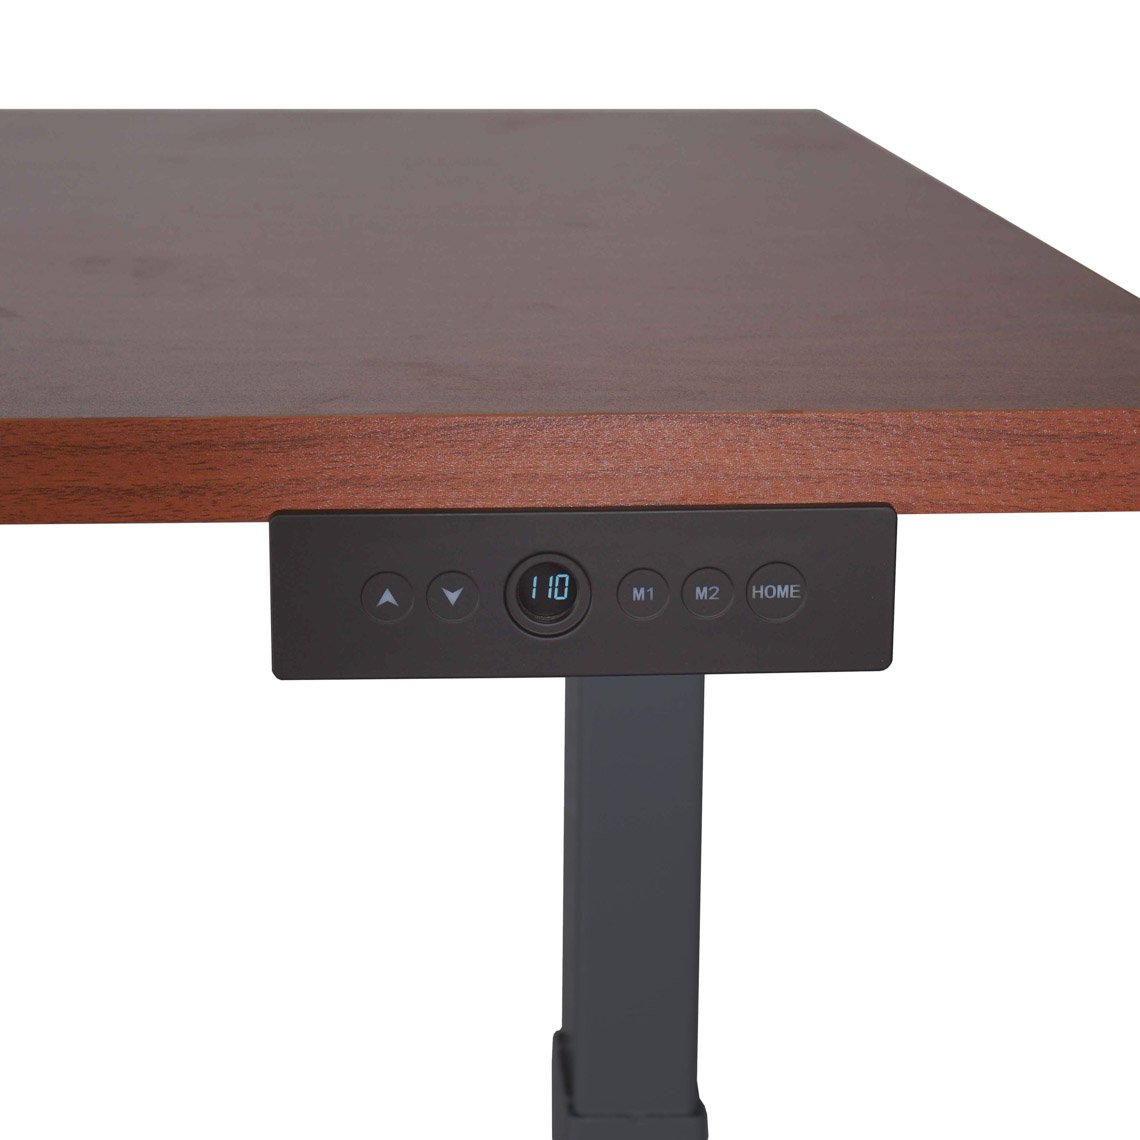 A6 Adjustable Sit To Stand Desk 24"- 50" W/ Wood 60" X 30" Top - view 6